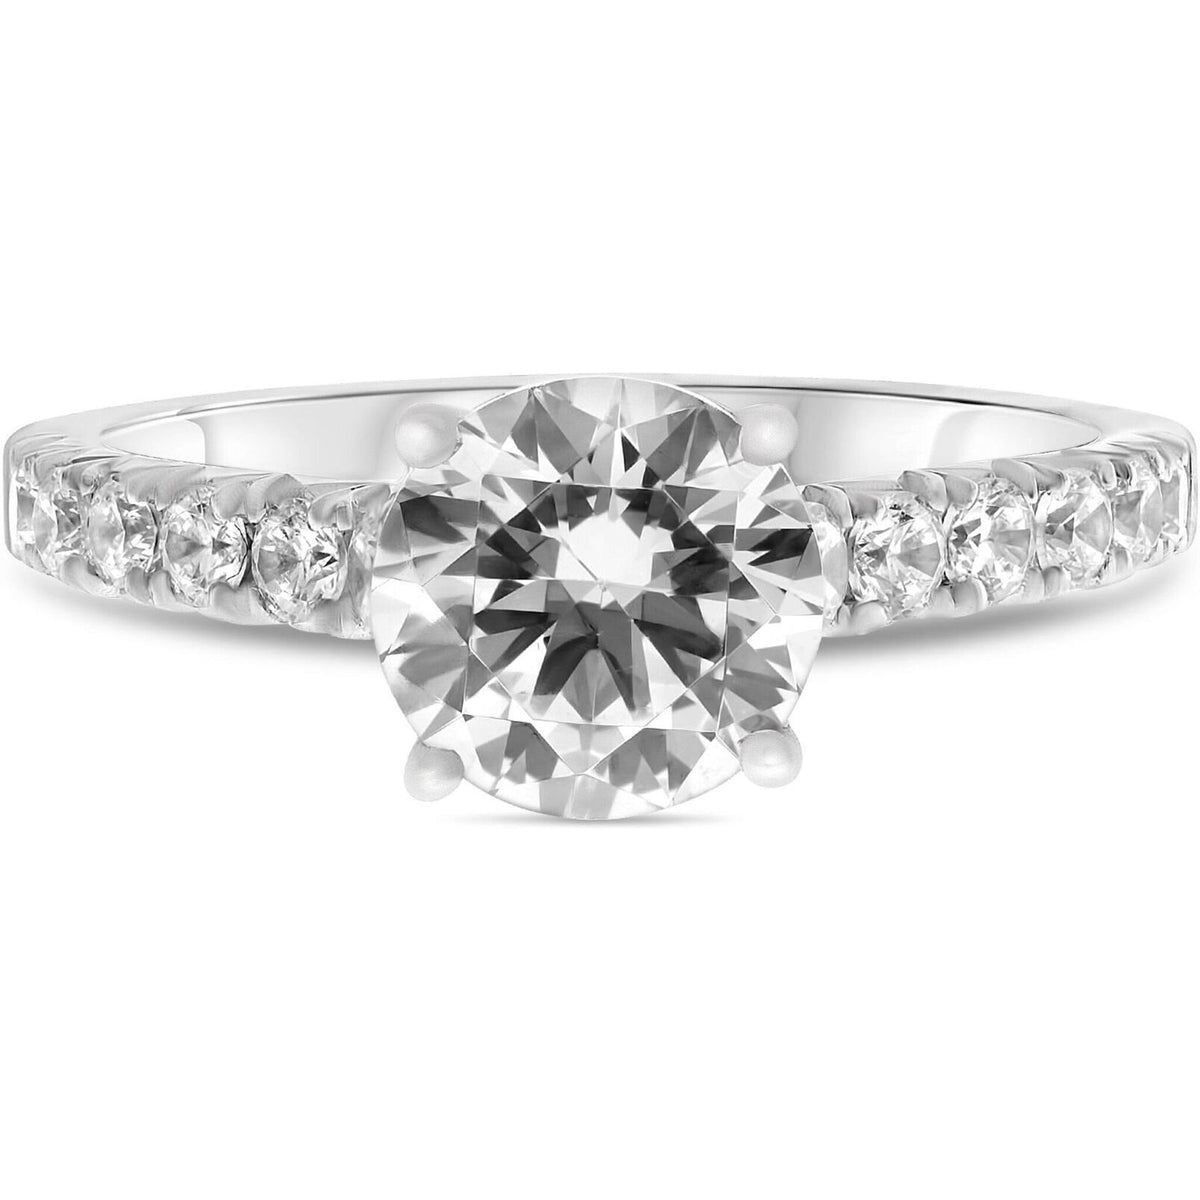 Exquisite Engagement Ring with Four-Prong Setting